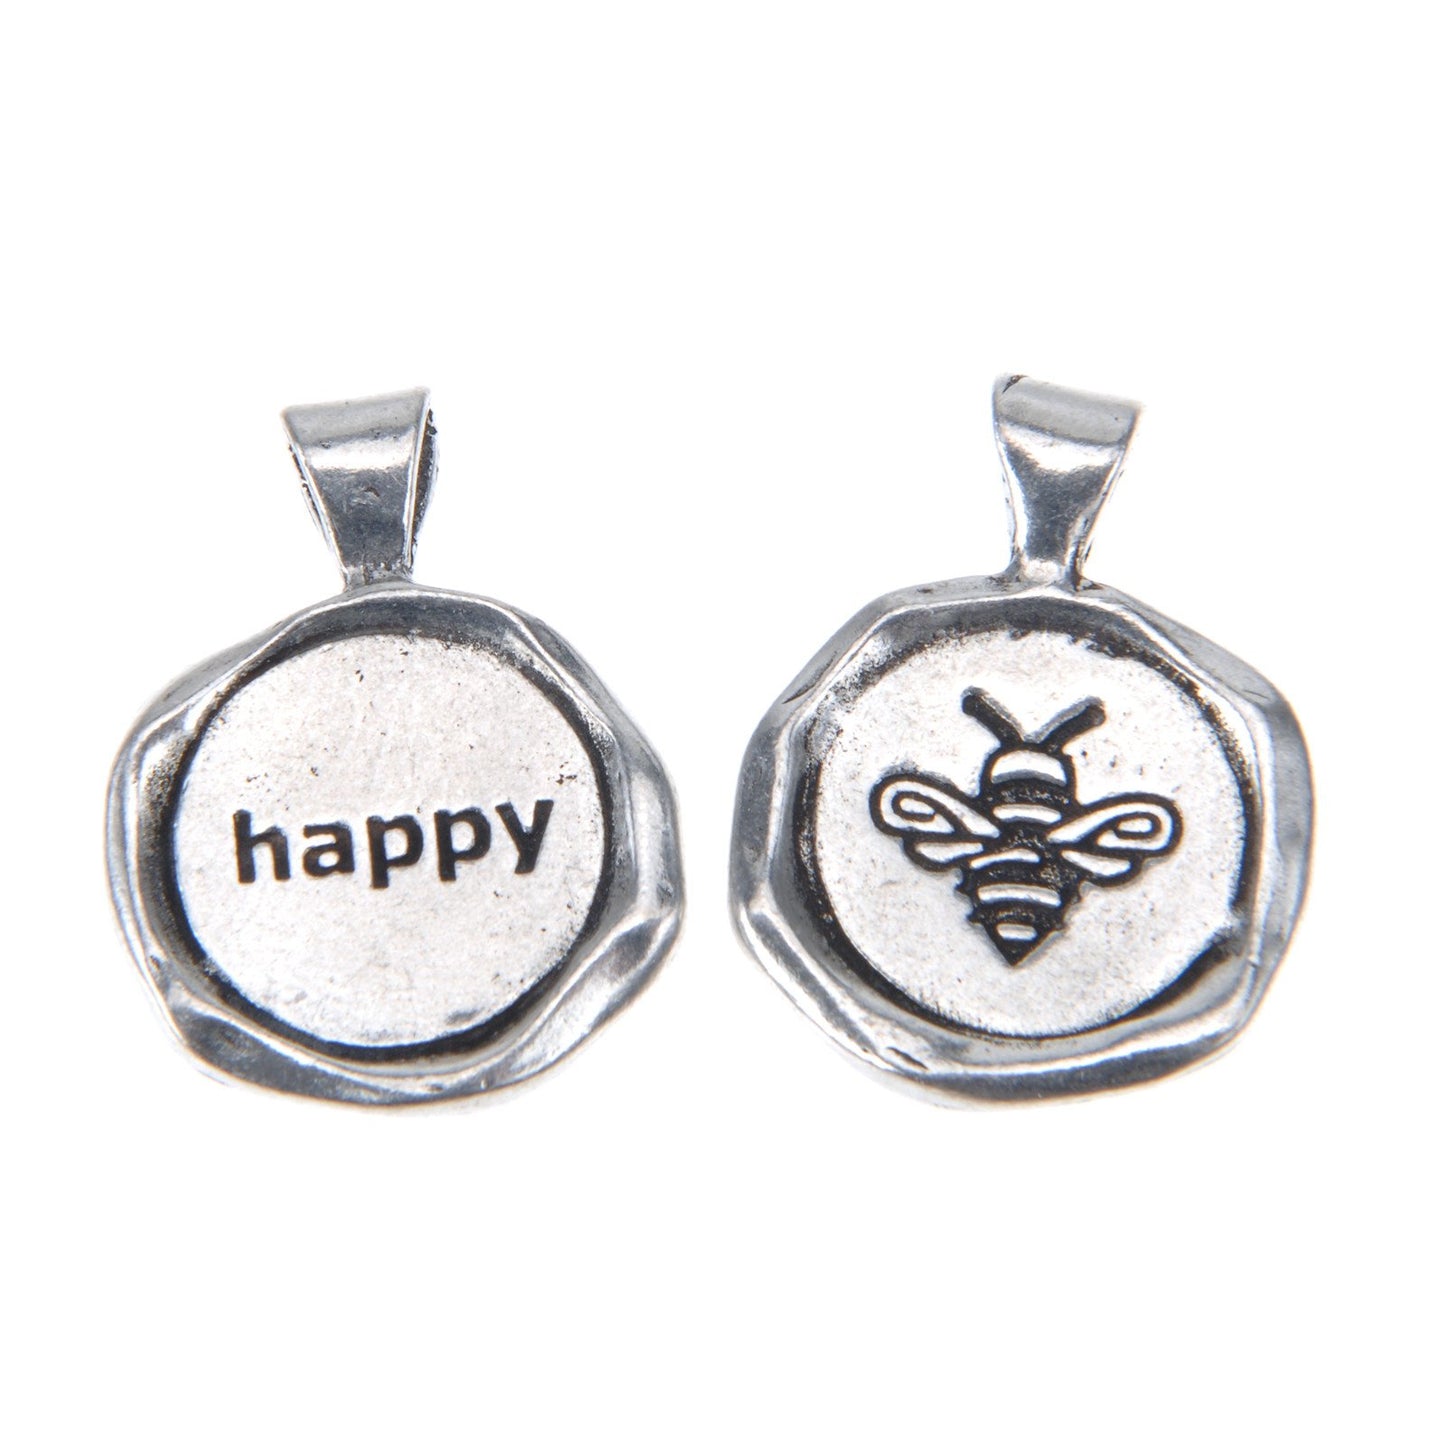 Happy Wax Seal front and back